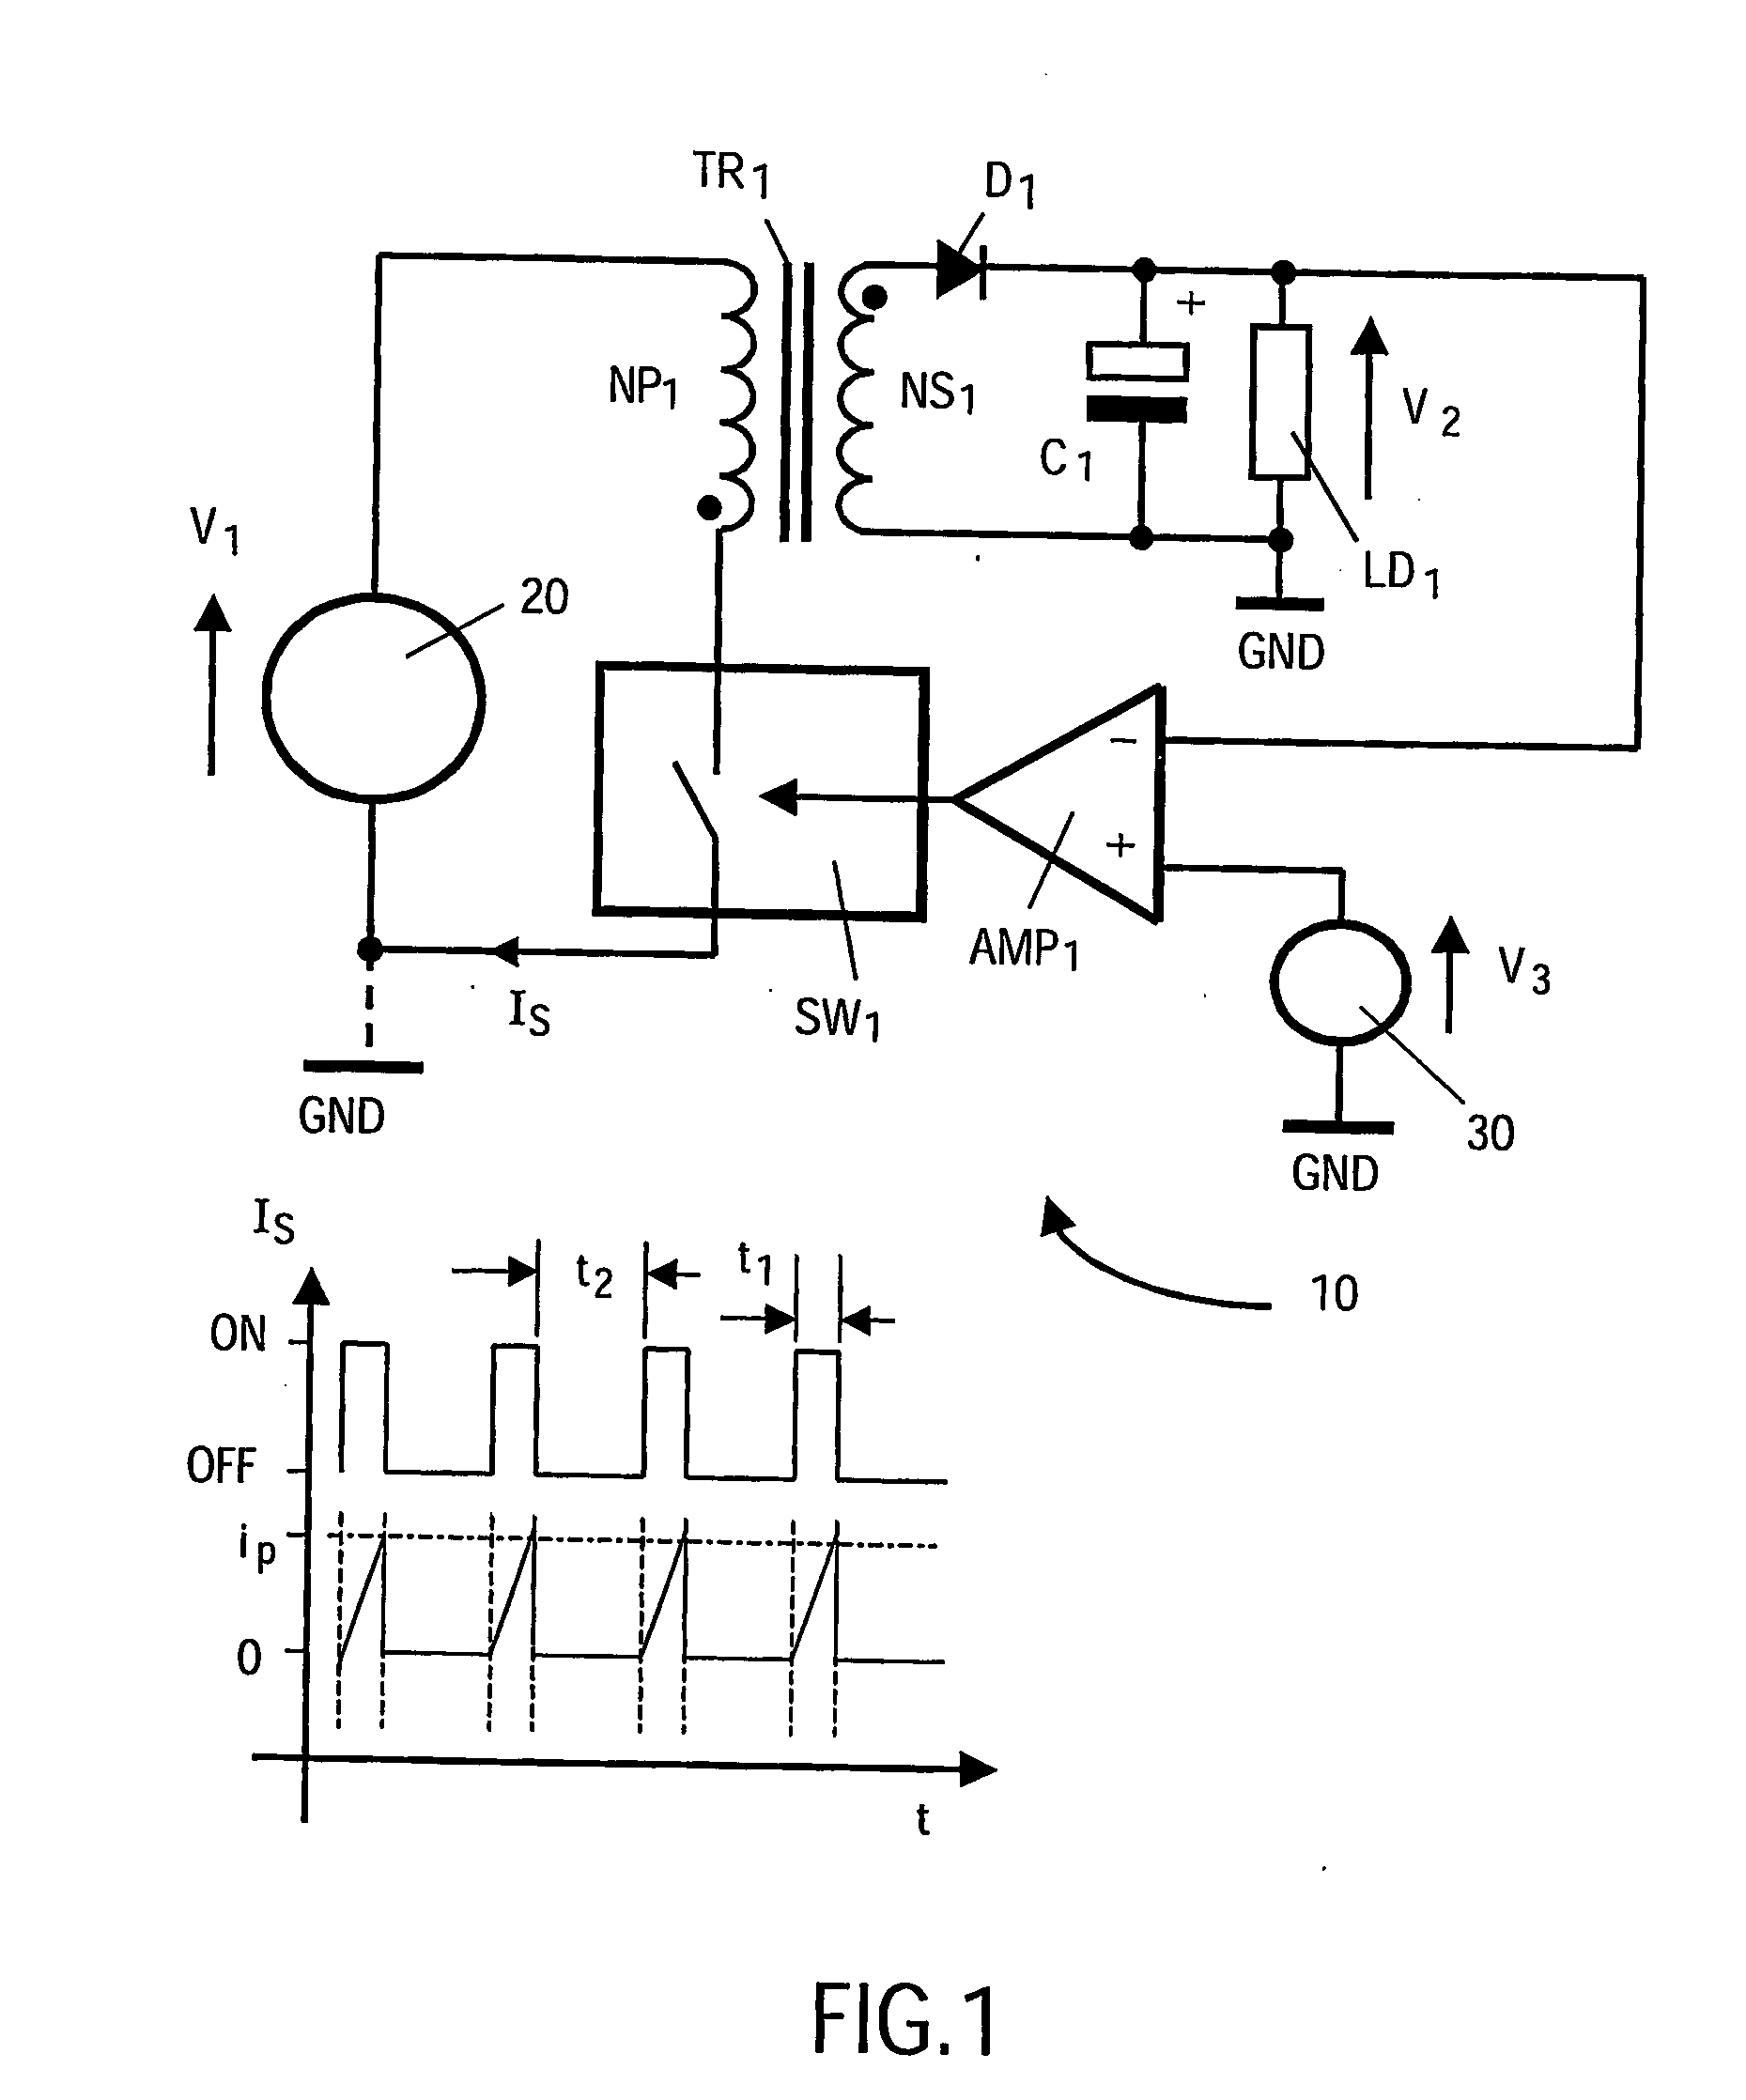 Switch mode power supply apparatus with multiple regulated outputs and a single feedback loop